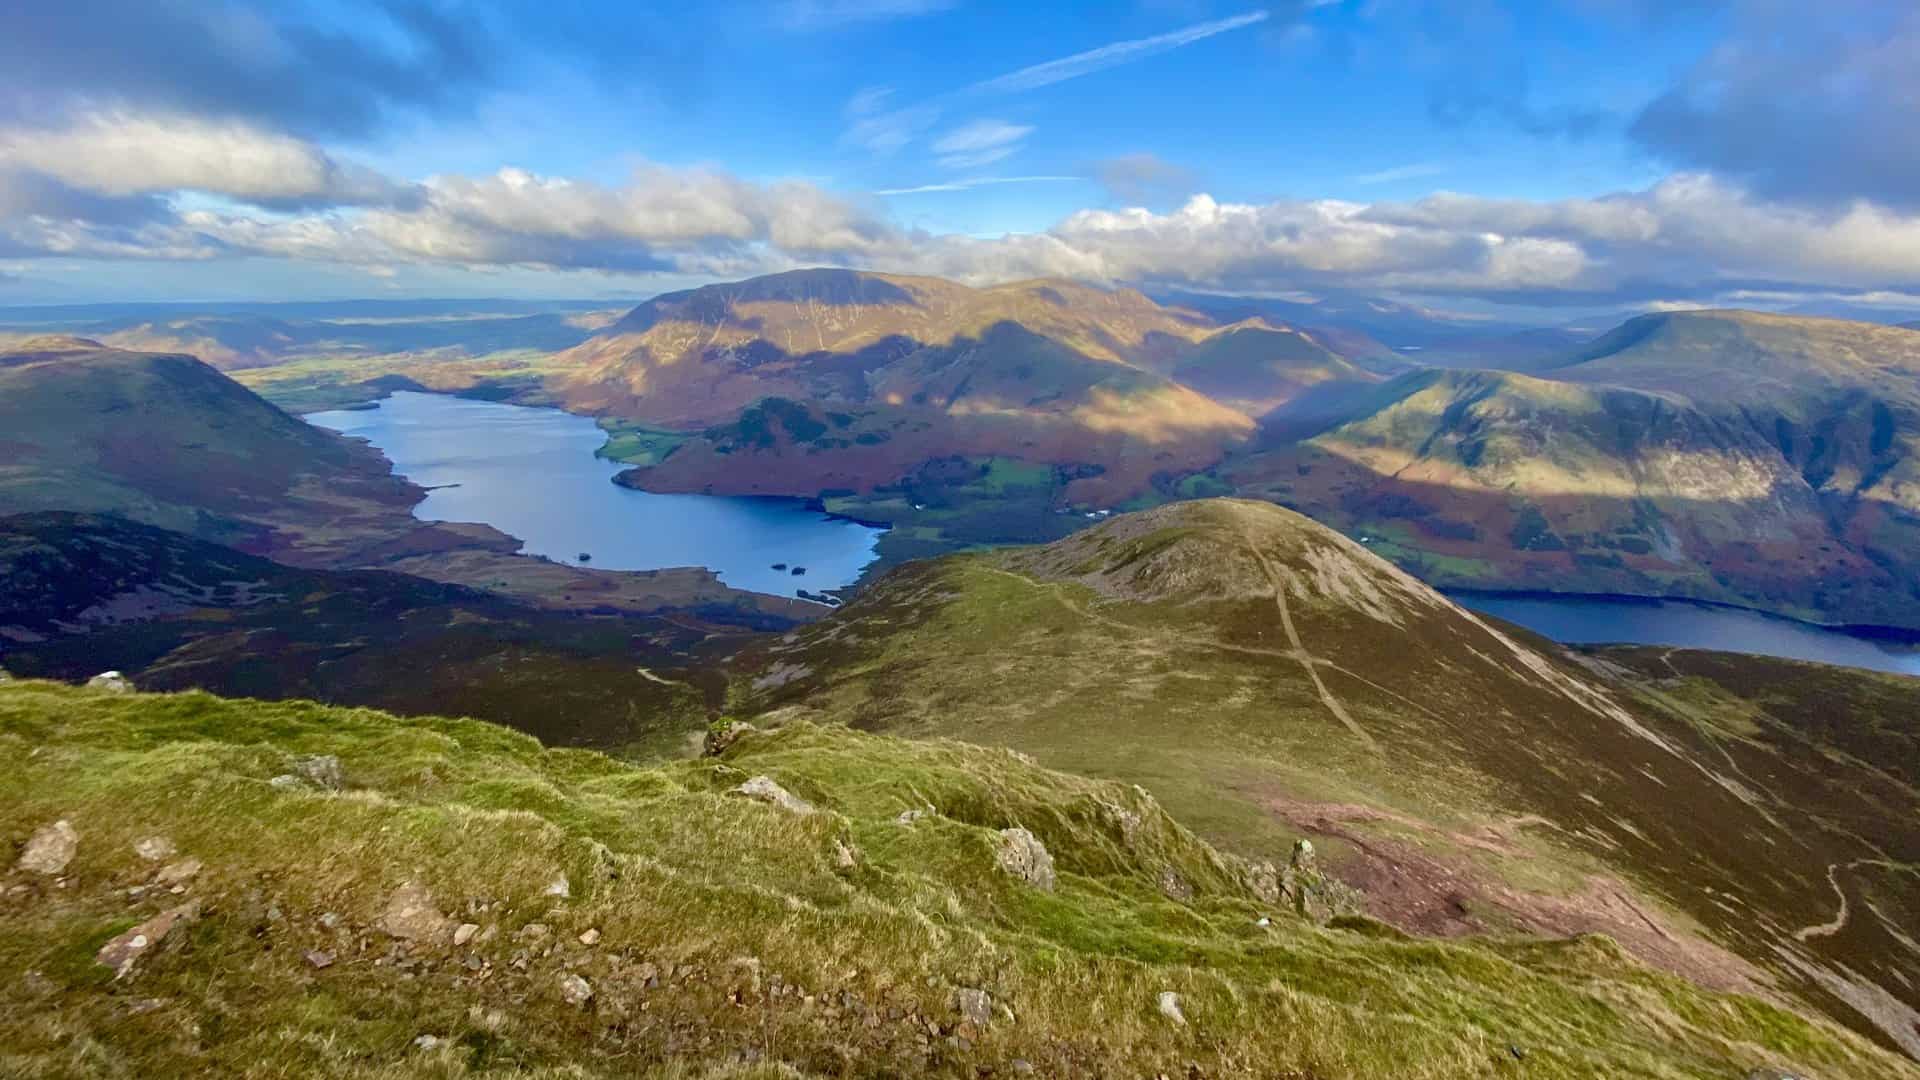 Magical scenes from Red Pike. The hill in the foreground is Dodd, with Crummock Water to the left.